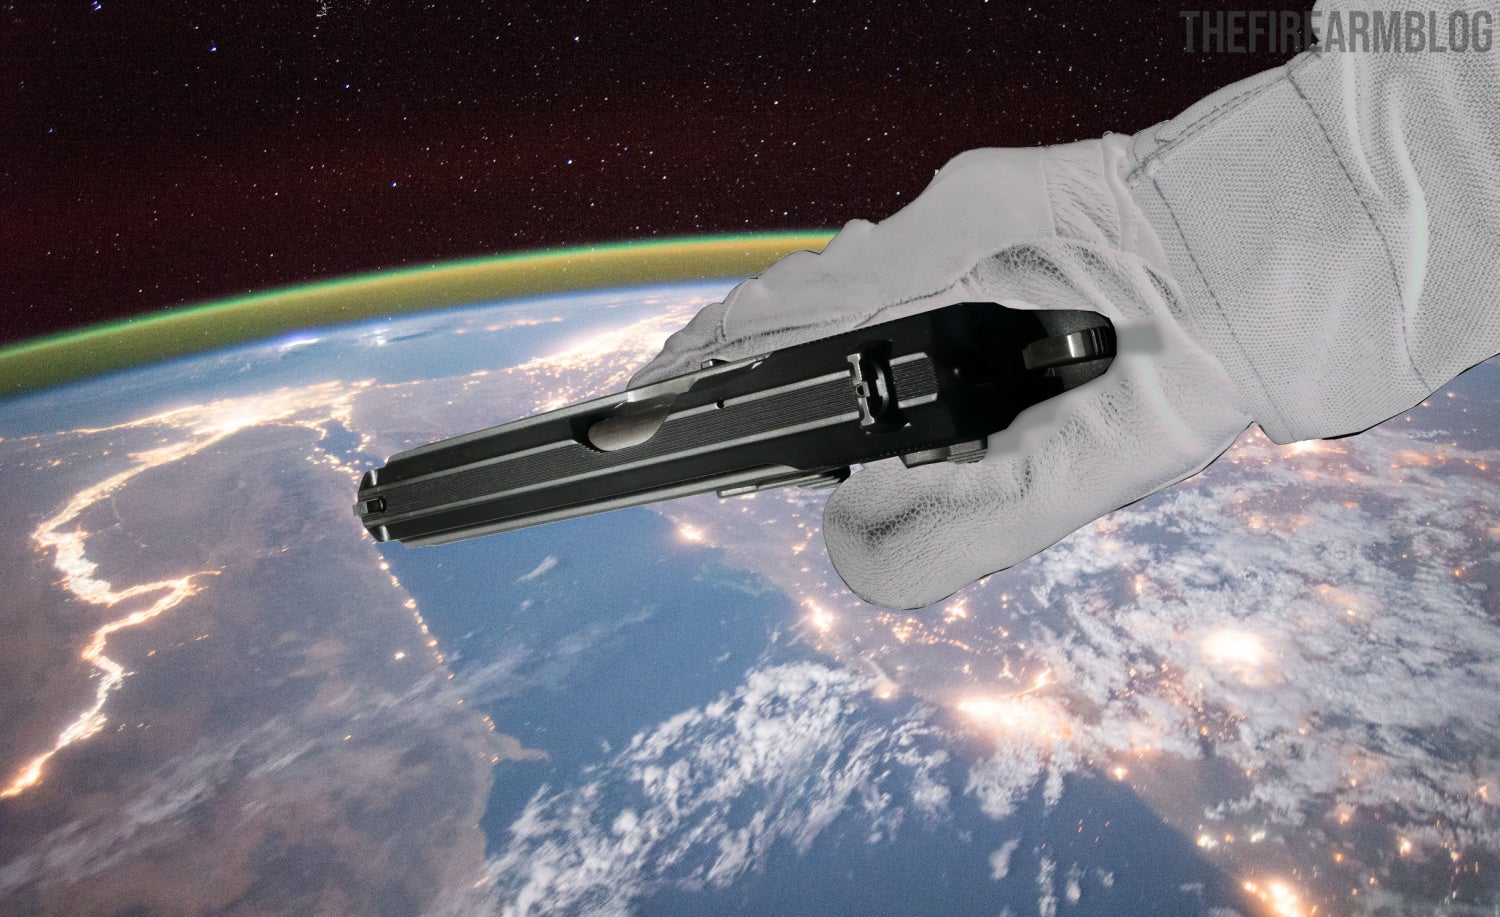 Arming the Space Force PART 2